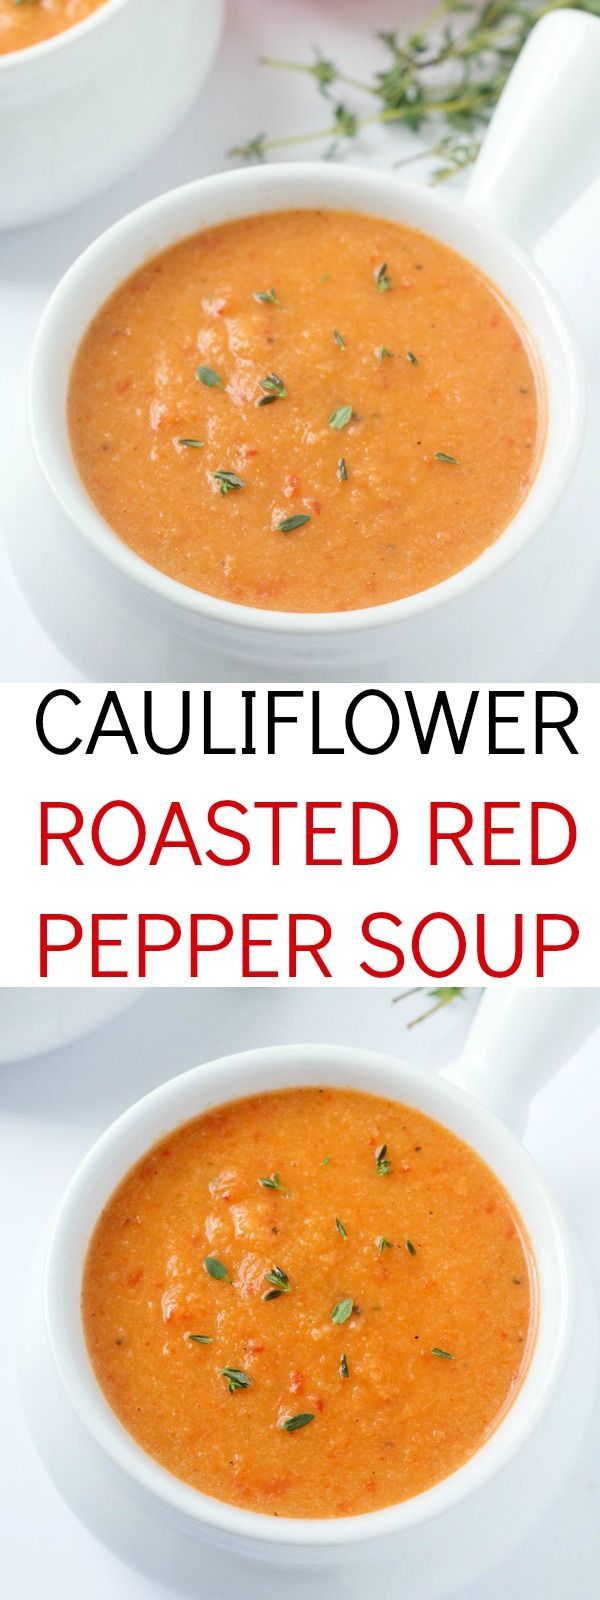 An out-of-this-world delicious cauliflower roasted red pepper soup recipe! This will be your new favorite soup – it’s ours!